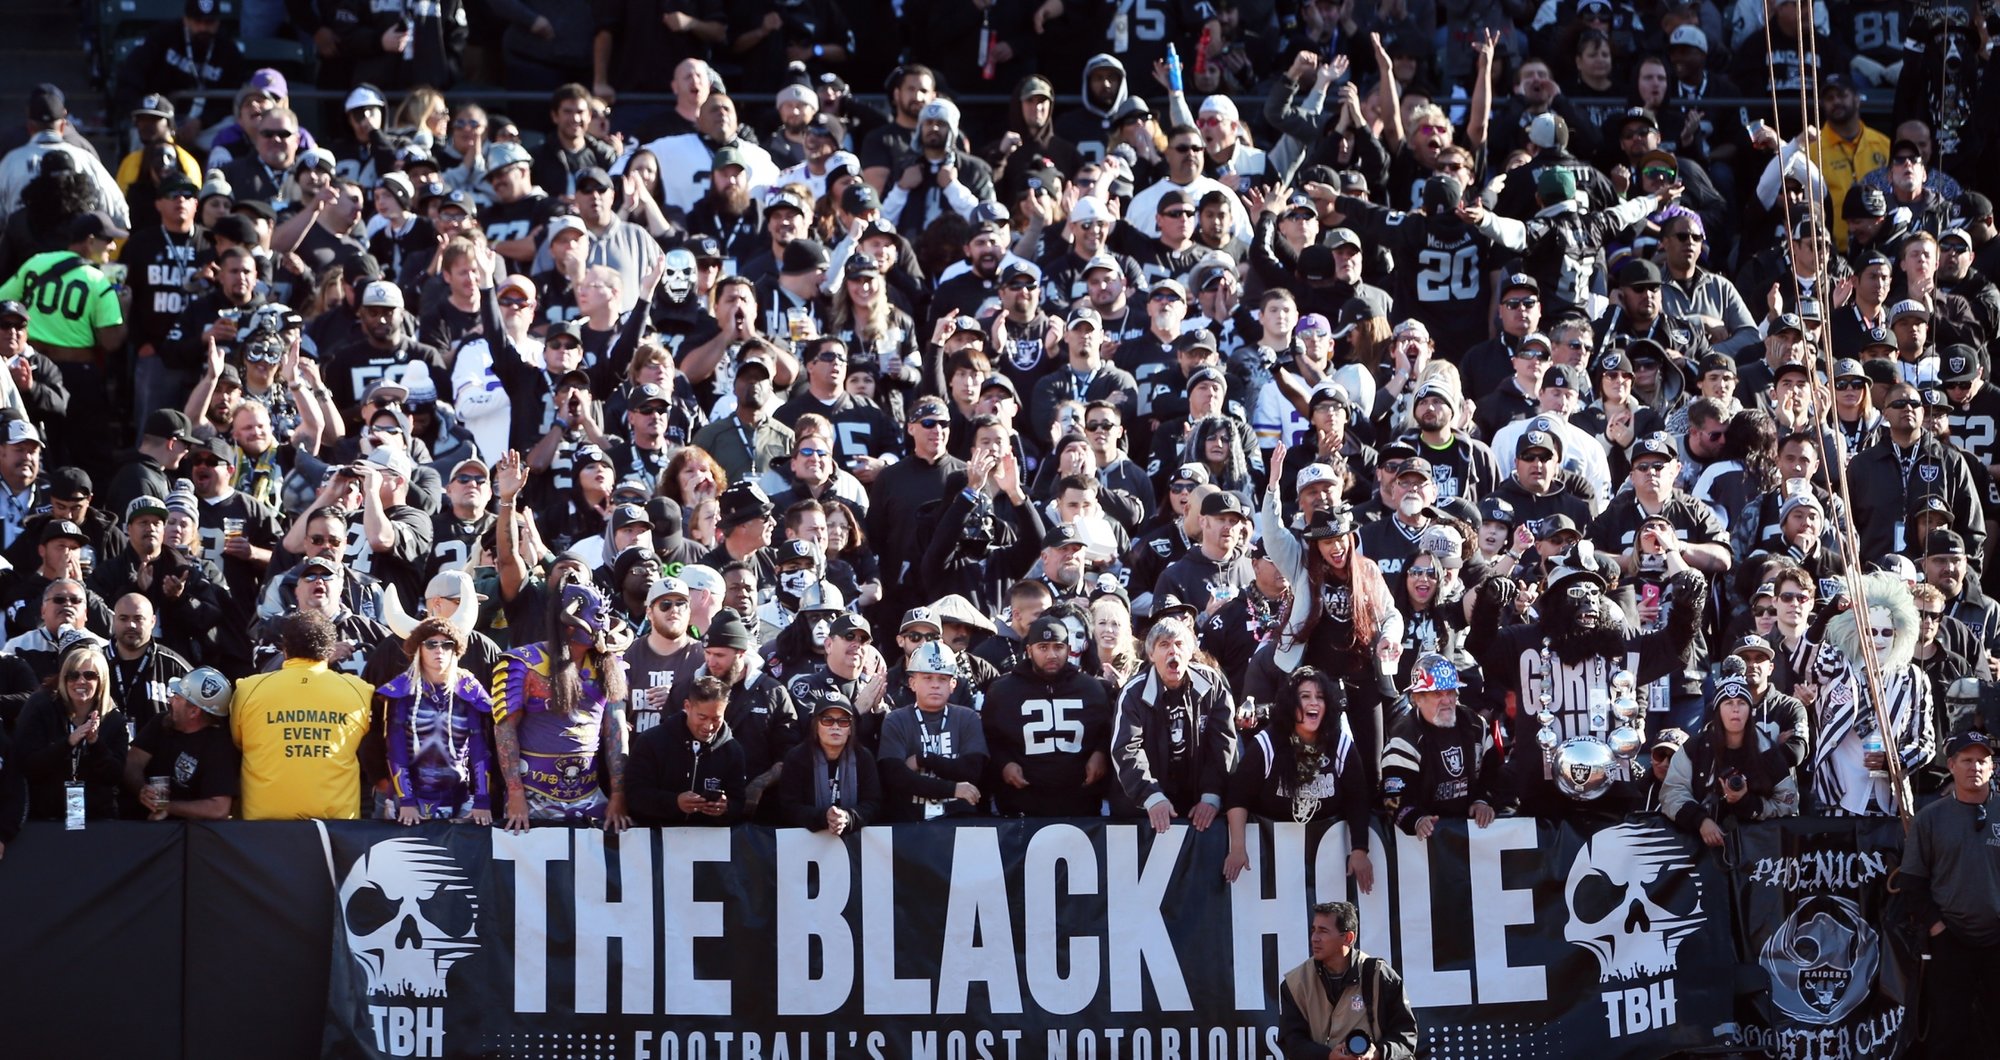 70+ Oakland Raiders HD Wallpapers and